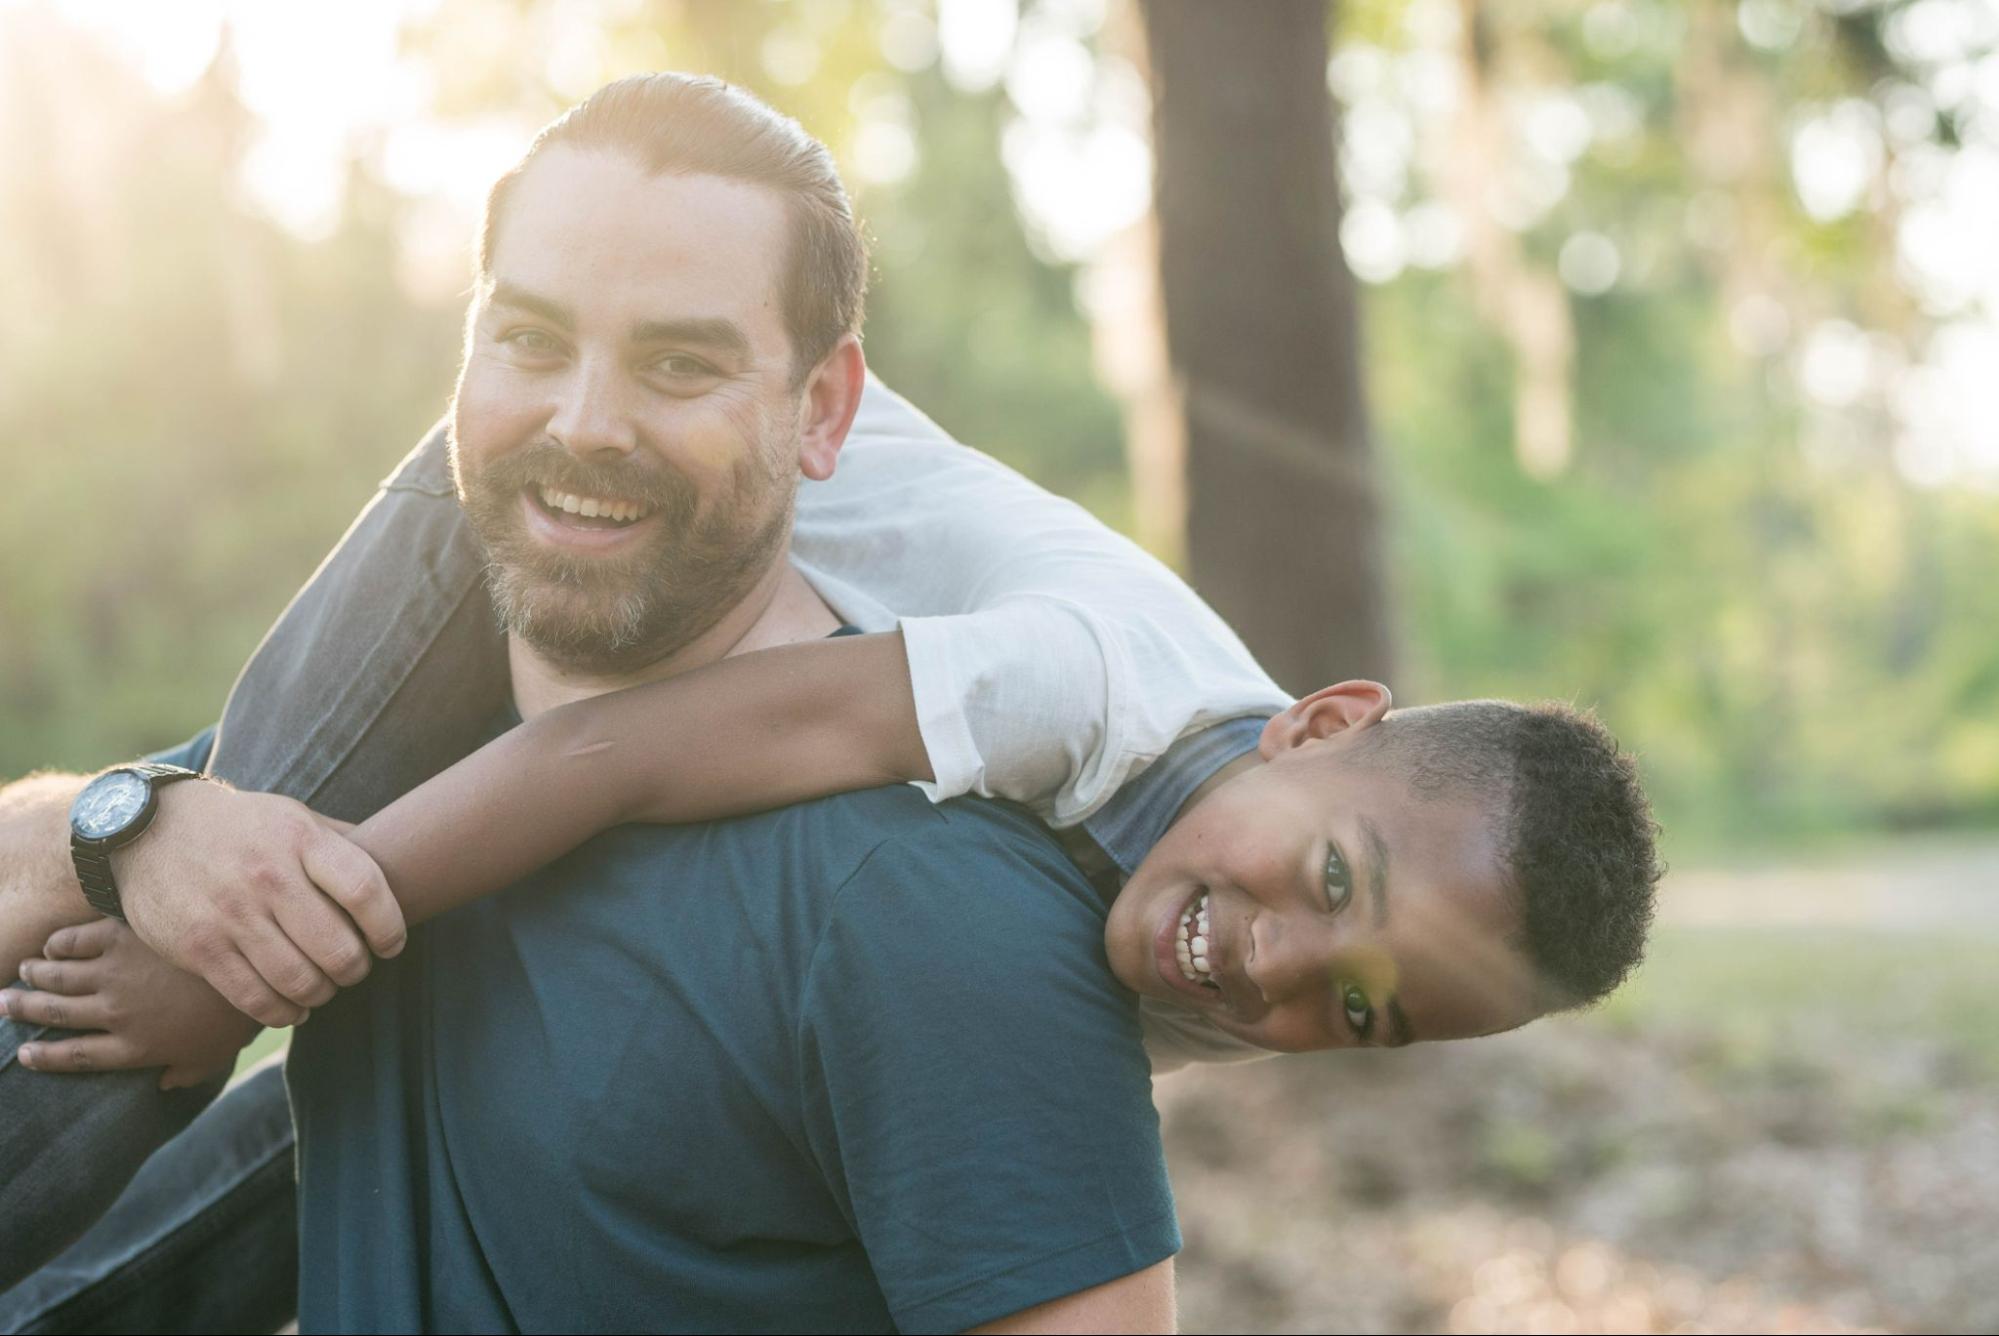 A man hoists his son over his shoulder in a park, both smiling.